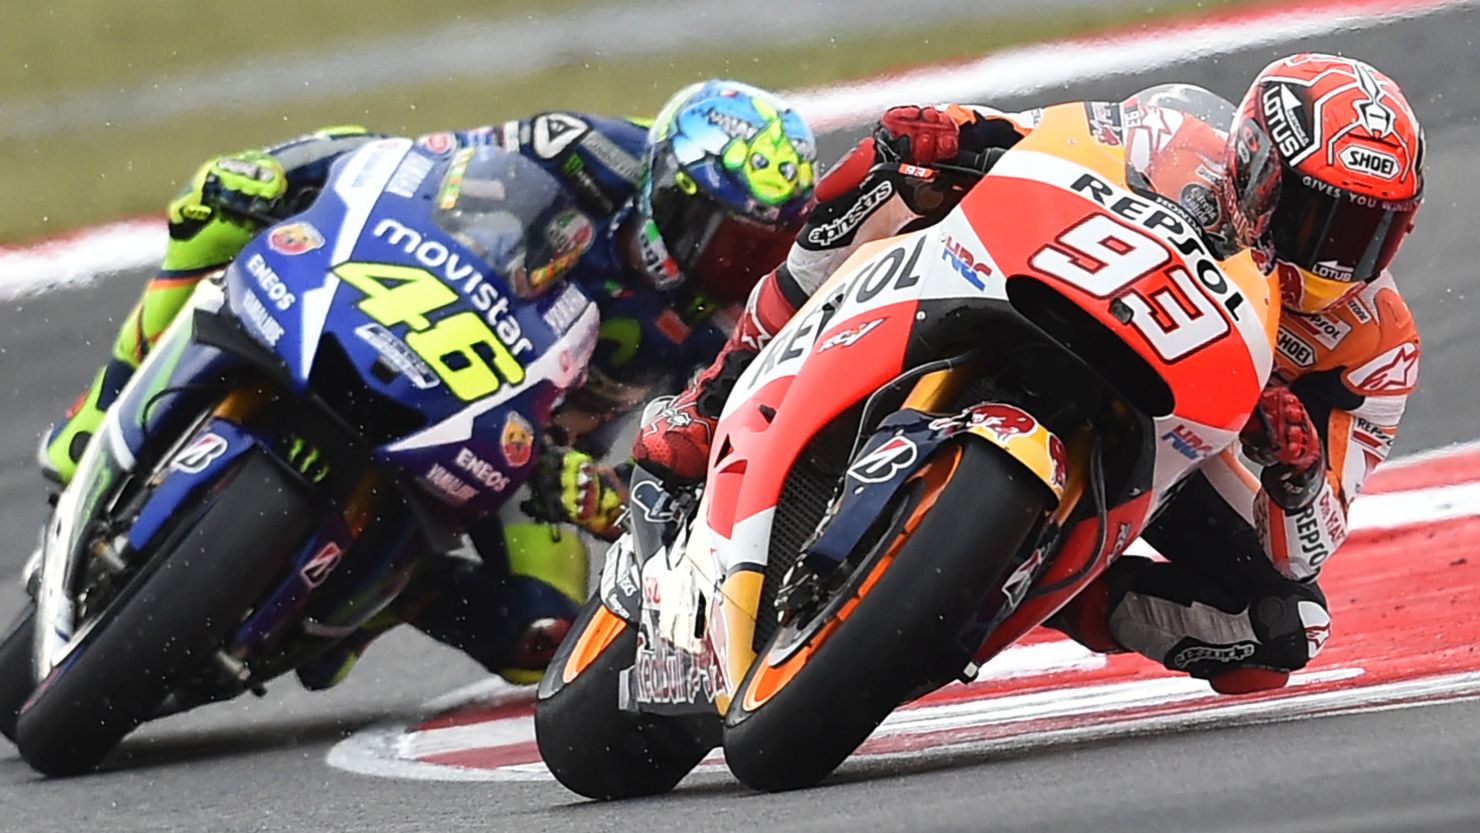 Marc Marquez is tracked by championship leader Valentino Rossi on his way to victory in the San Marino MotoGP at Misano.
